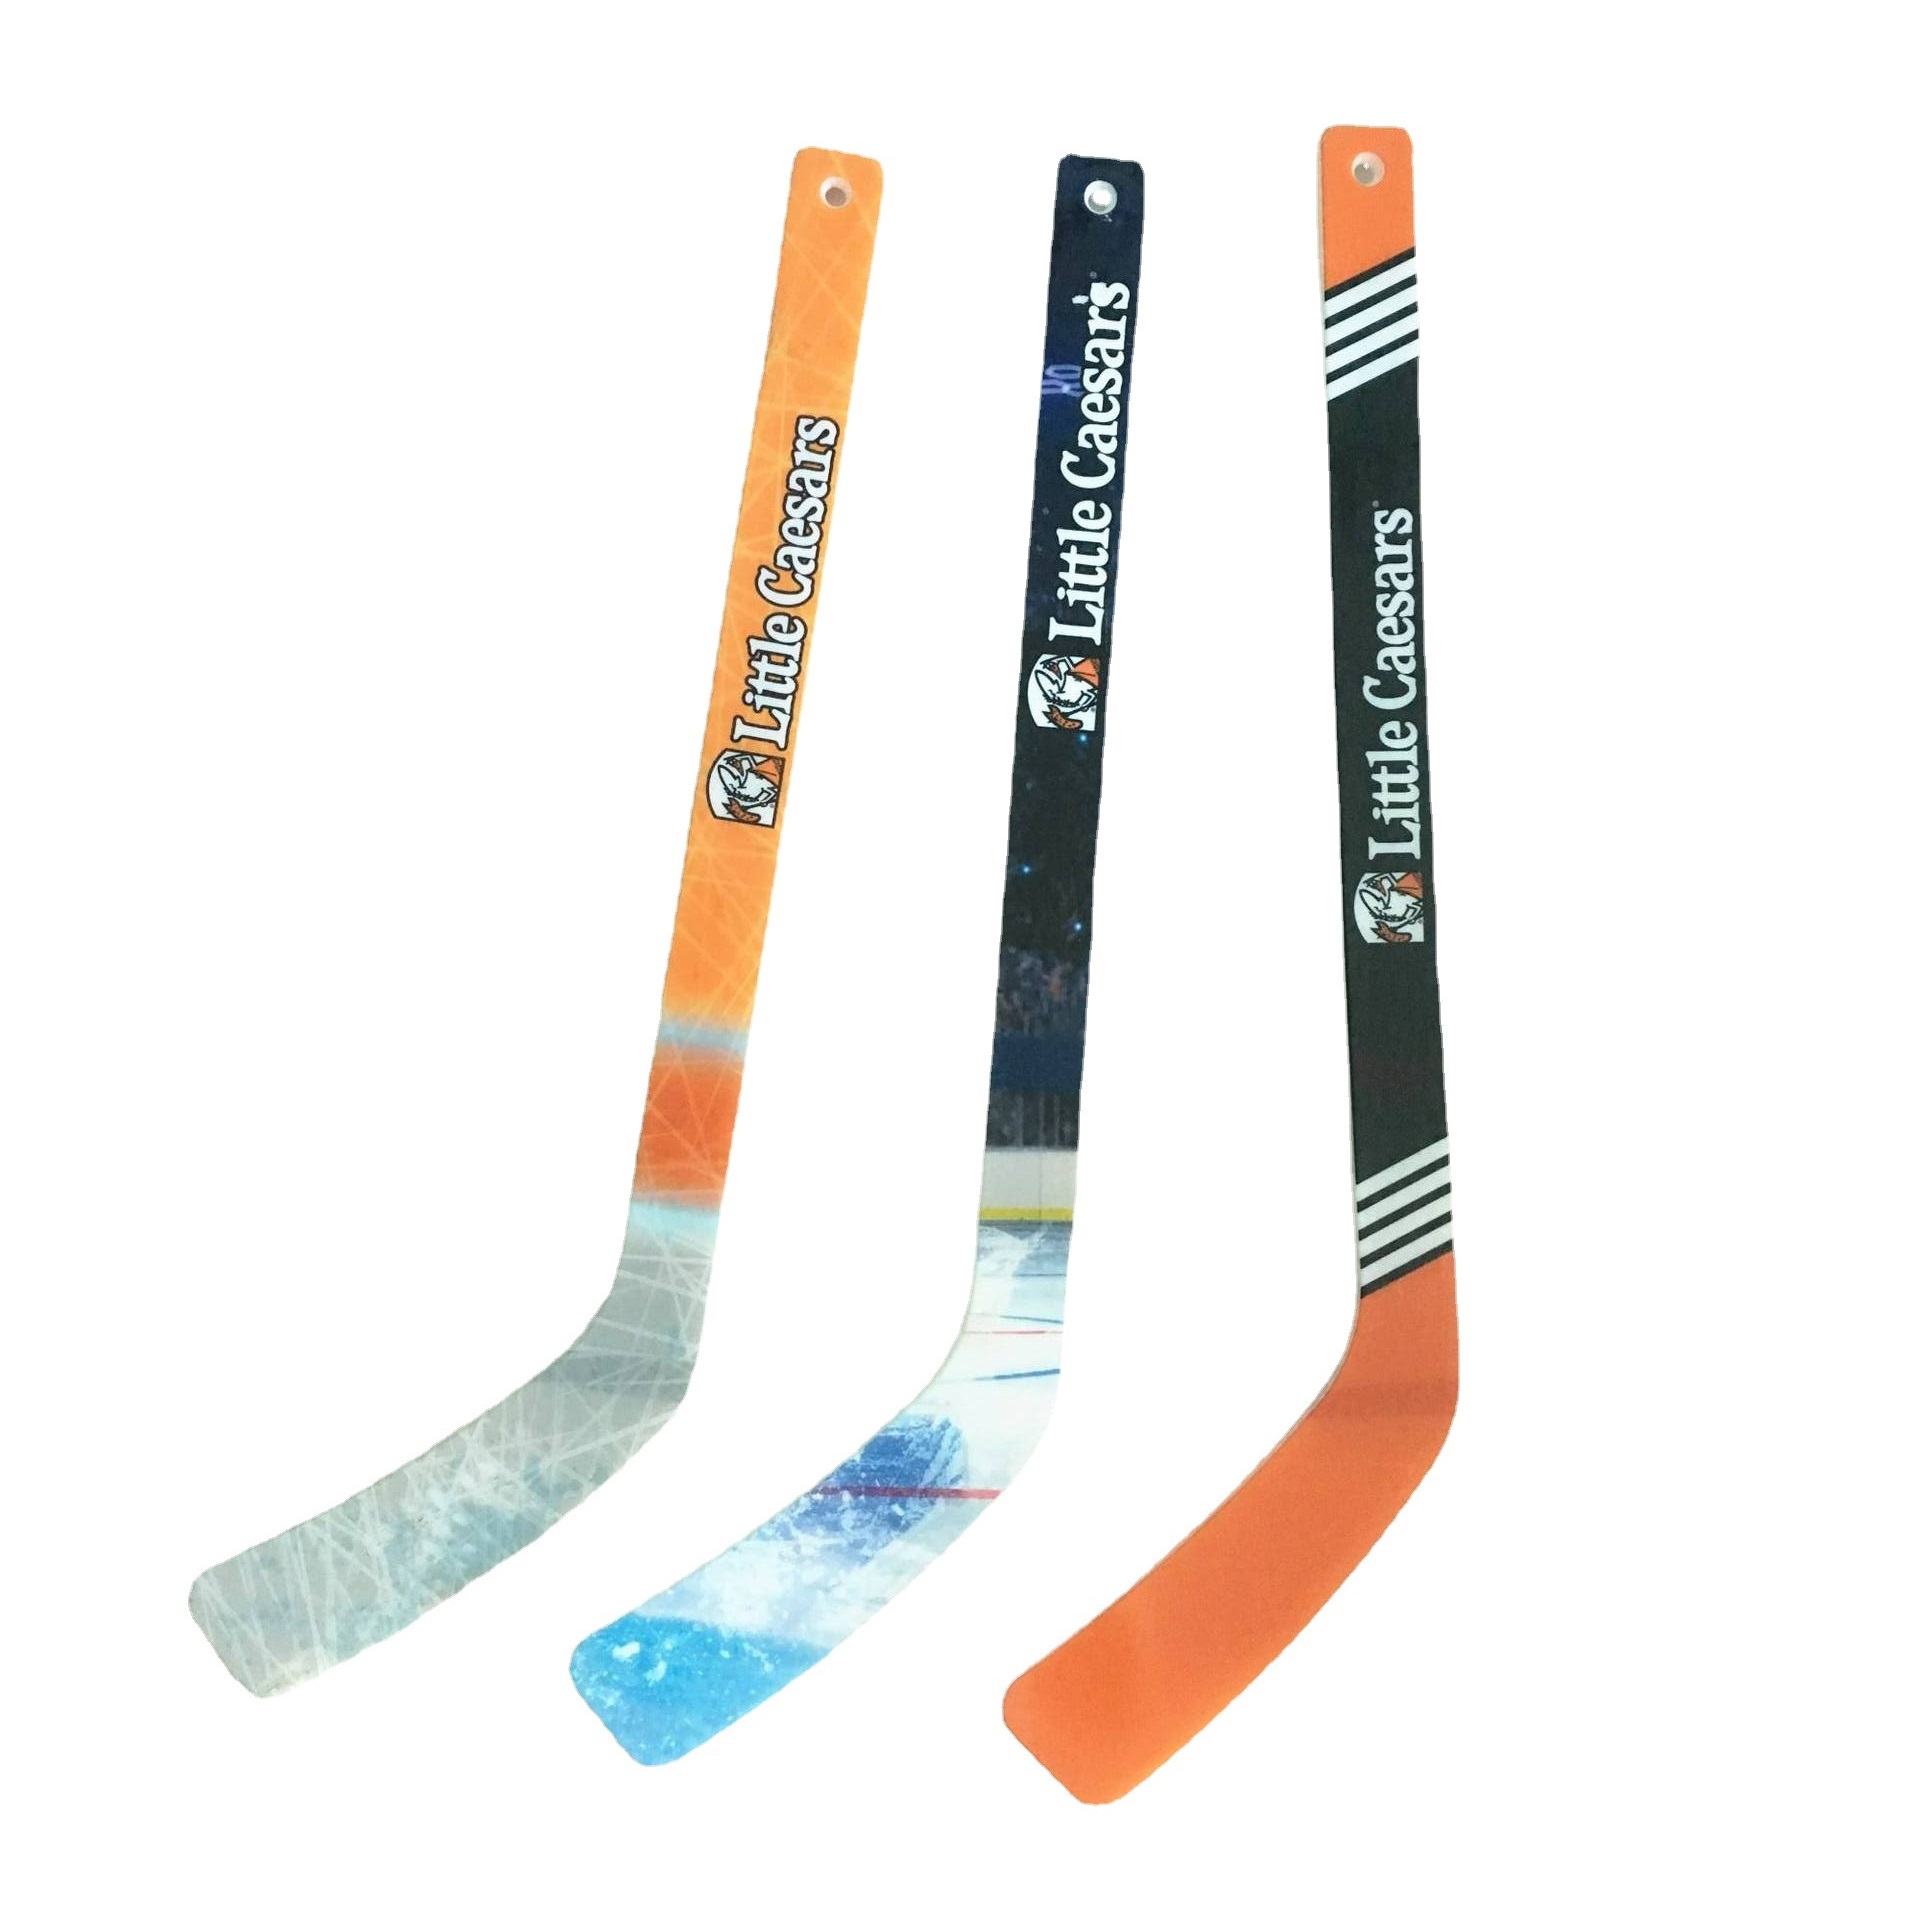 18" Heavy-Duty Plastic Hockey Sticks Starter for Players Indoor & Outdoor Beach Competition